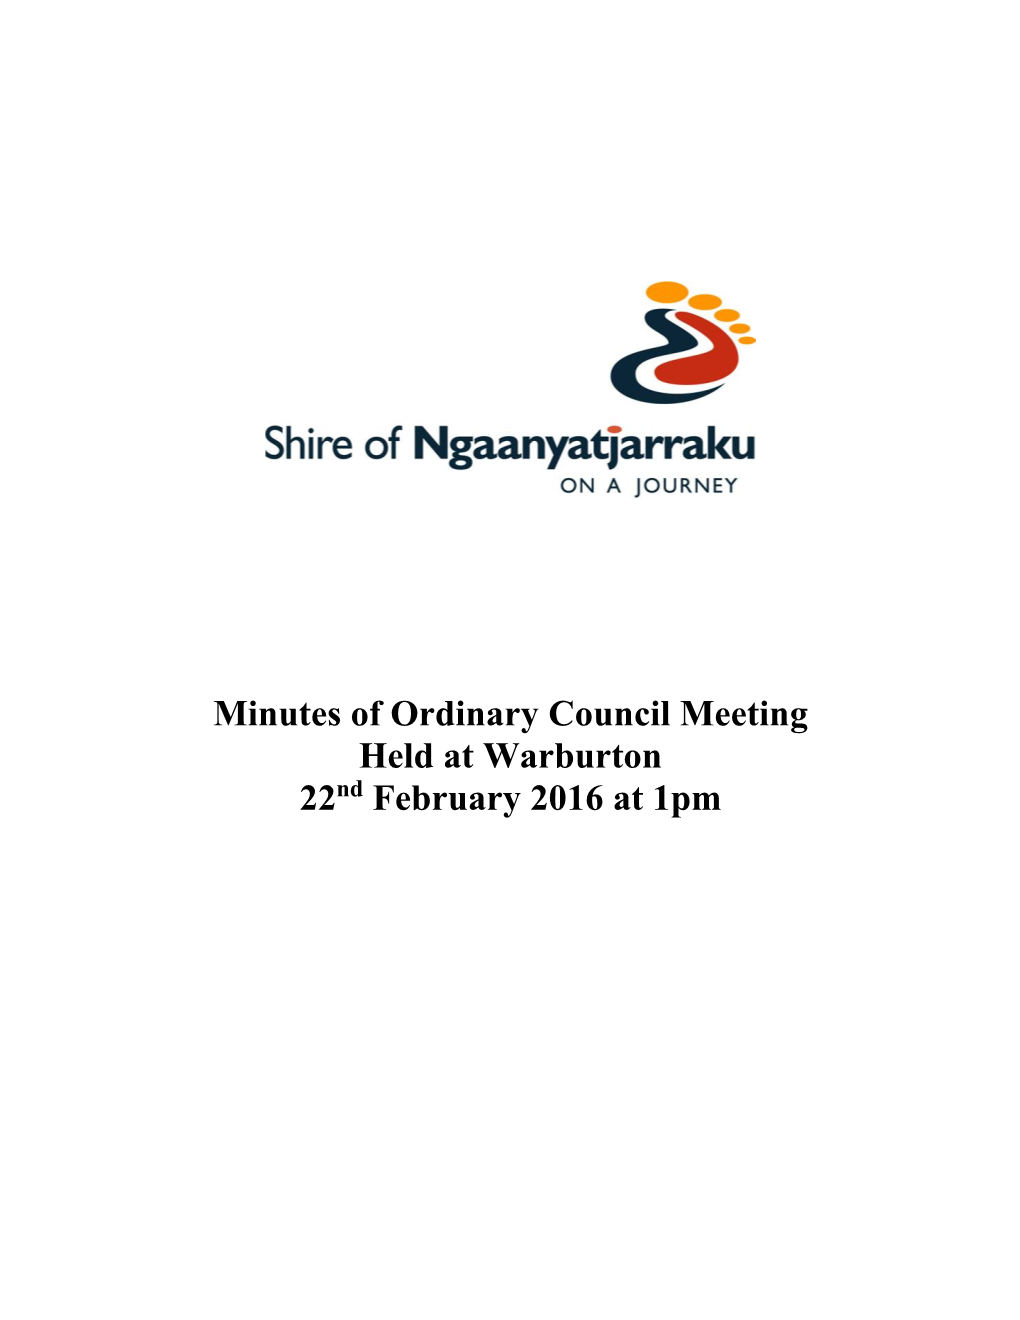 Minutes of Ordinary Council Meeting Held at Warburton 22 February